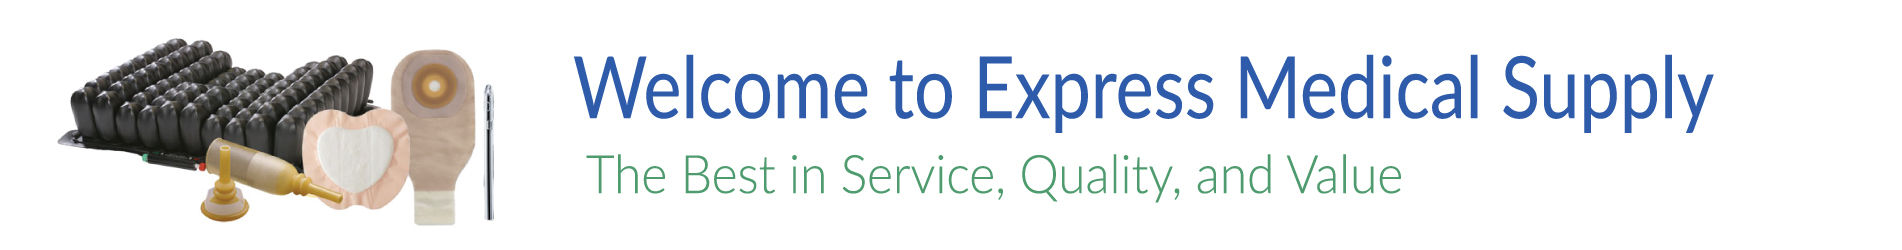 Welcome to Express Medical Supply, Inc.